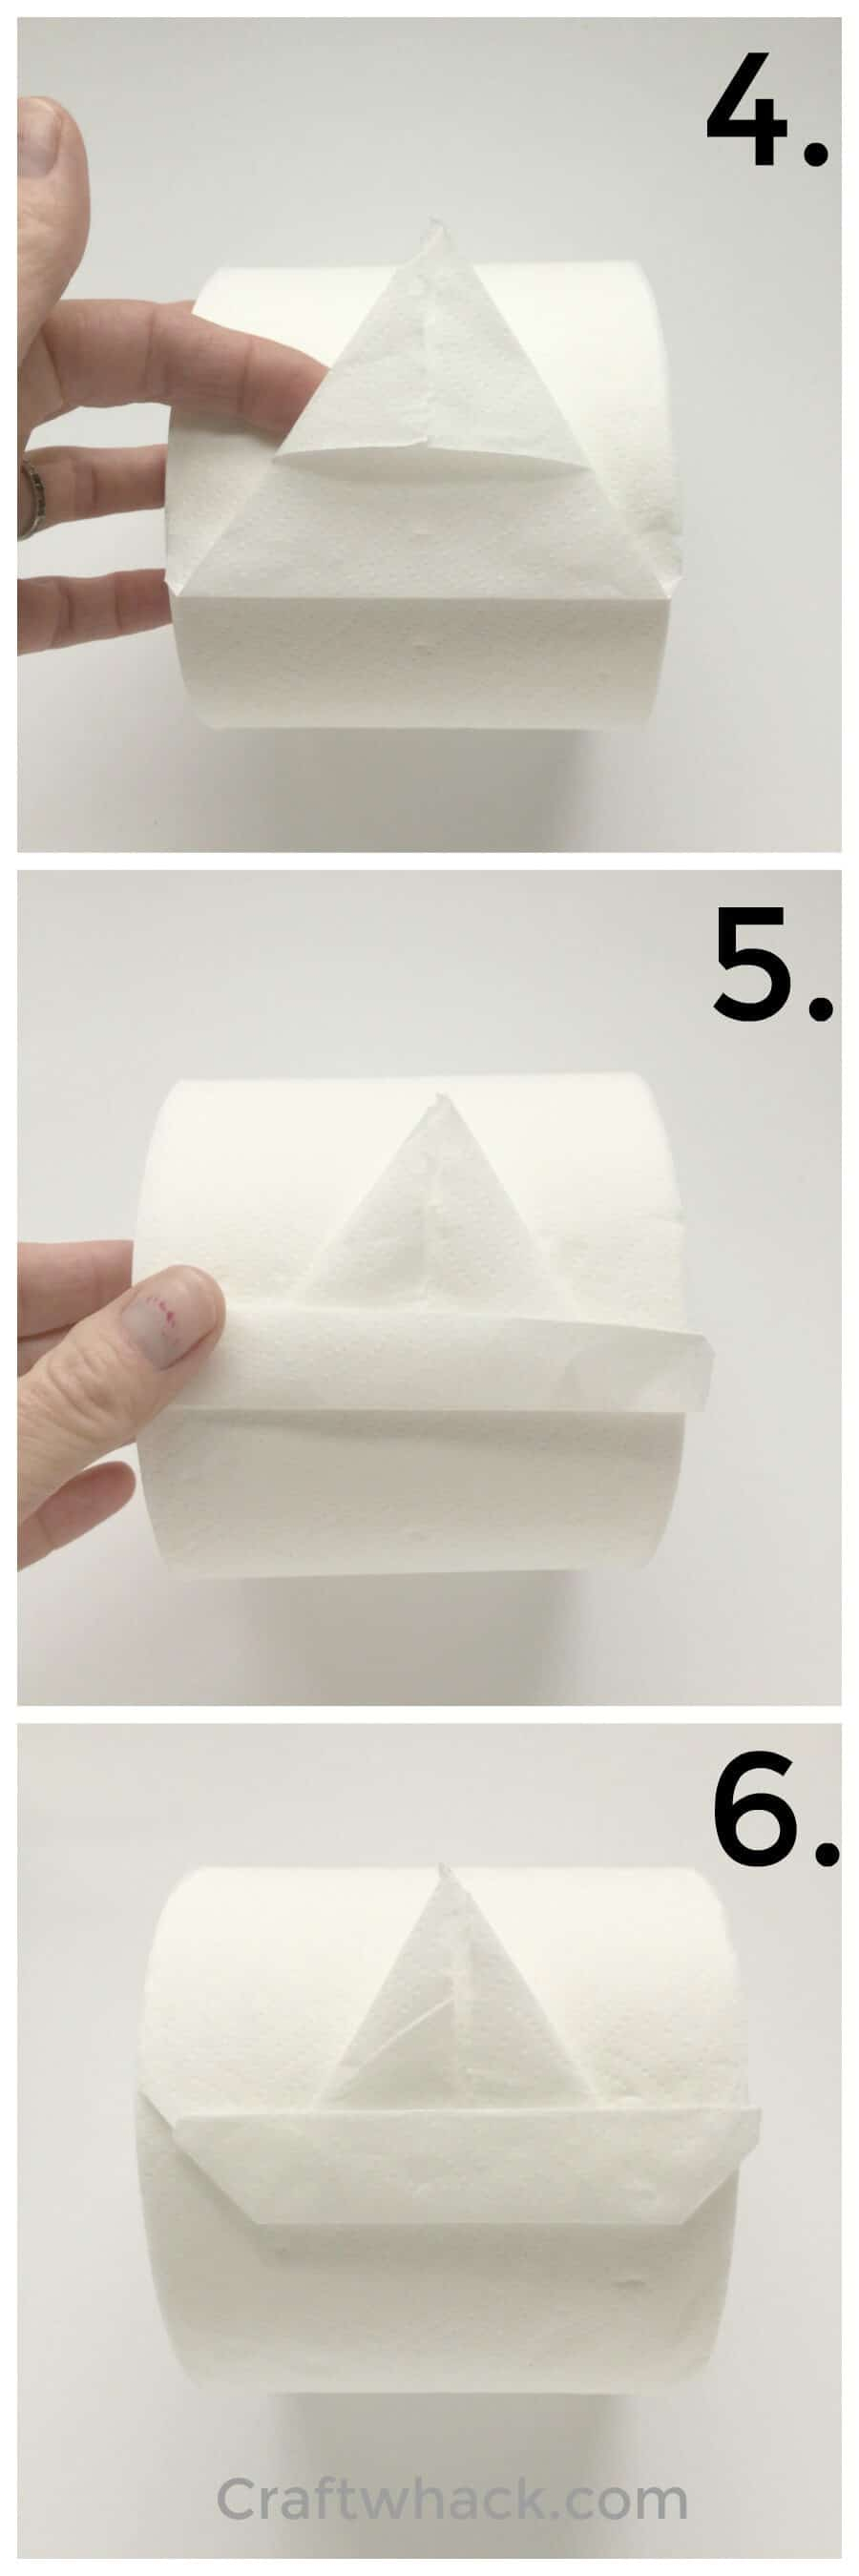 Origami Toilet Paper Ahoy Learn To Fold A Toilet Paper Origami Sailboat Craftwhack